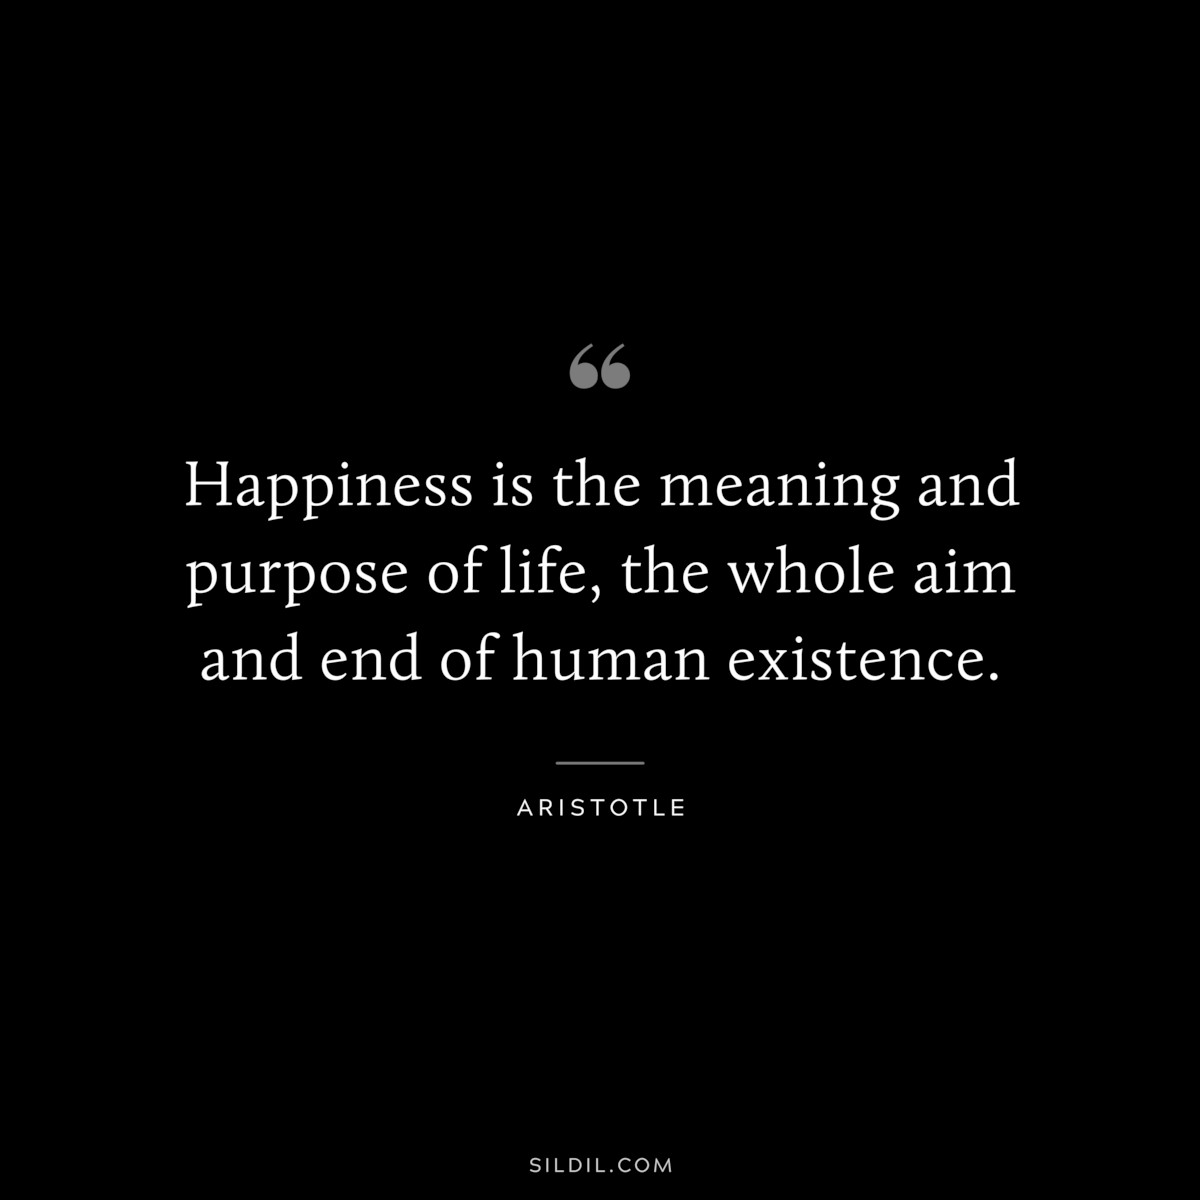 Happiness is the meaning and purpose of life, the whole aim and end of human existence. ― Aristotle